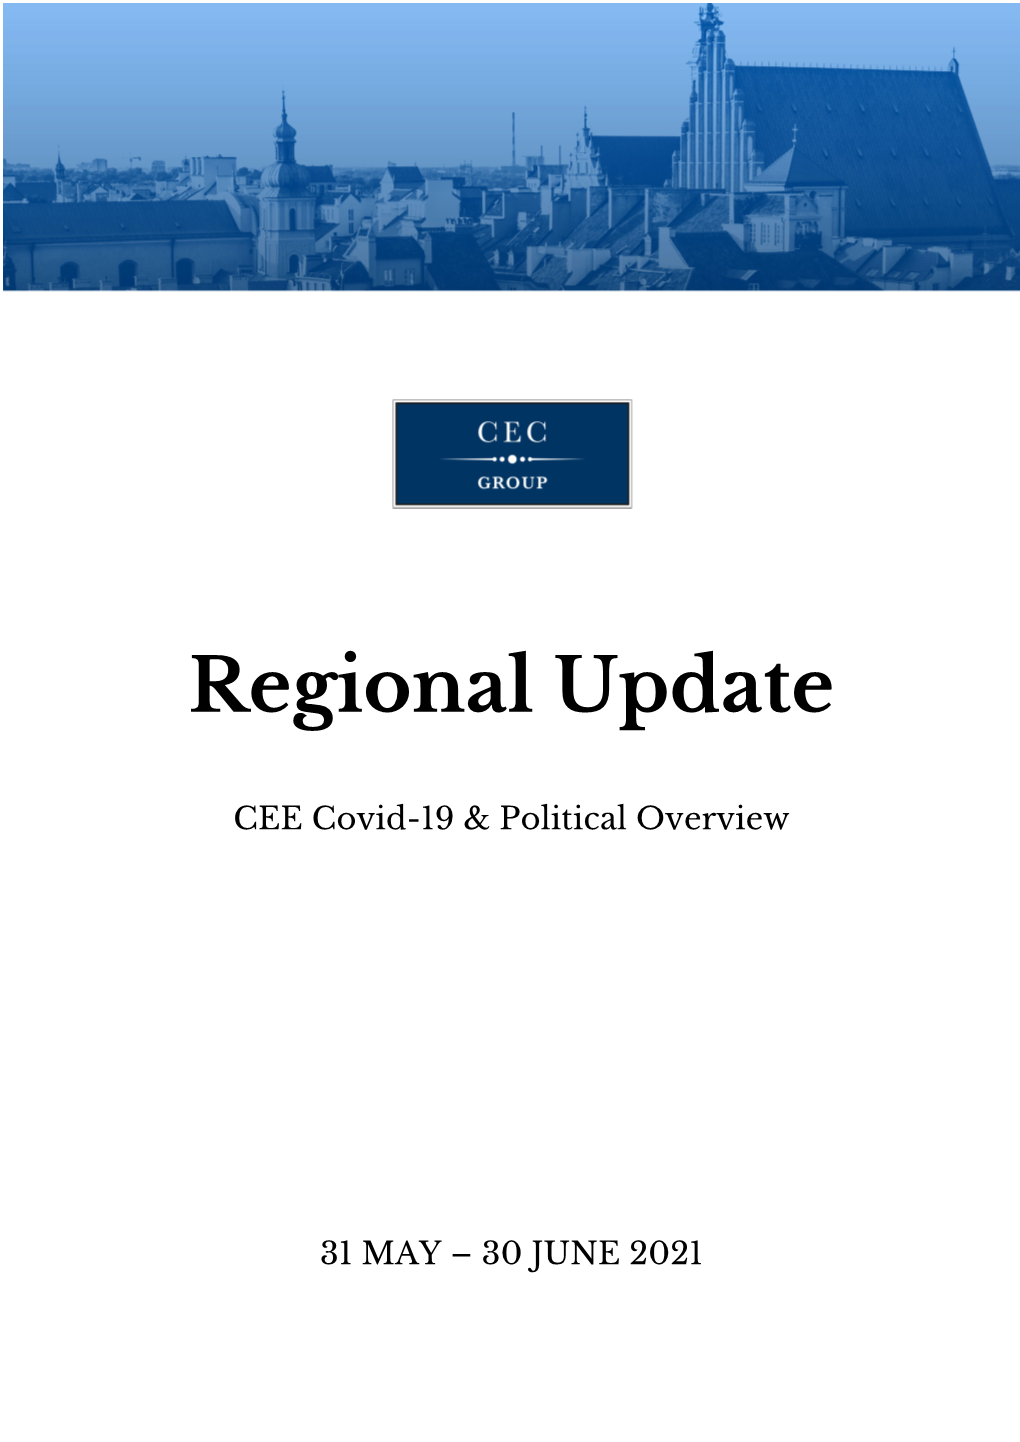 CEE Covid-19 & Political Overview 30 June 2021